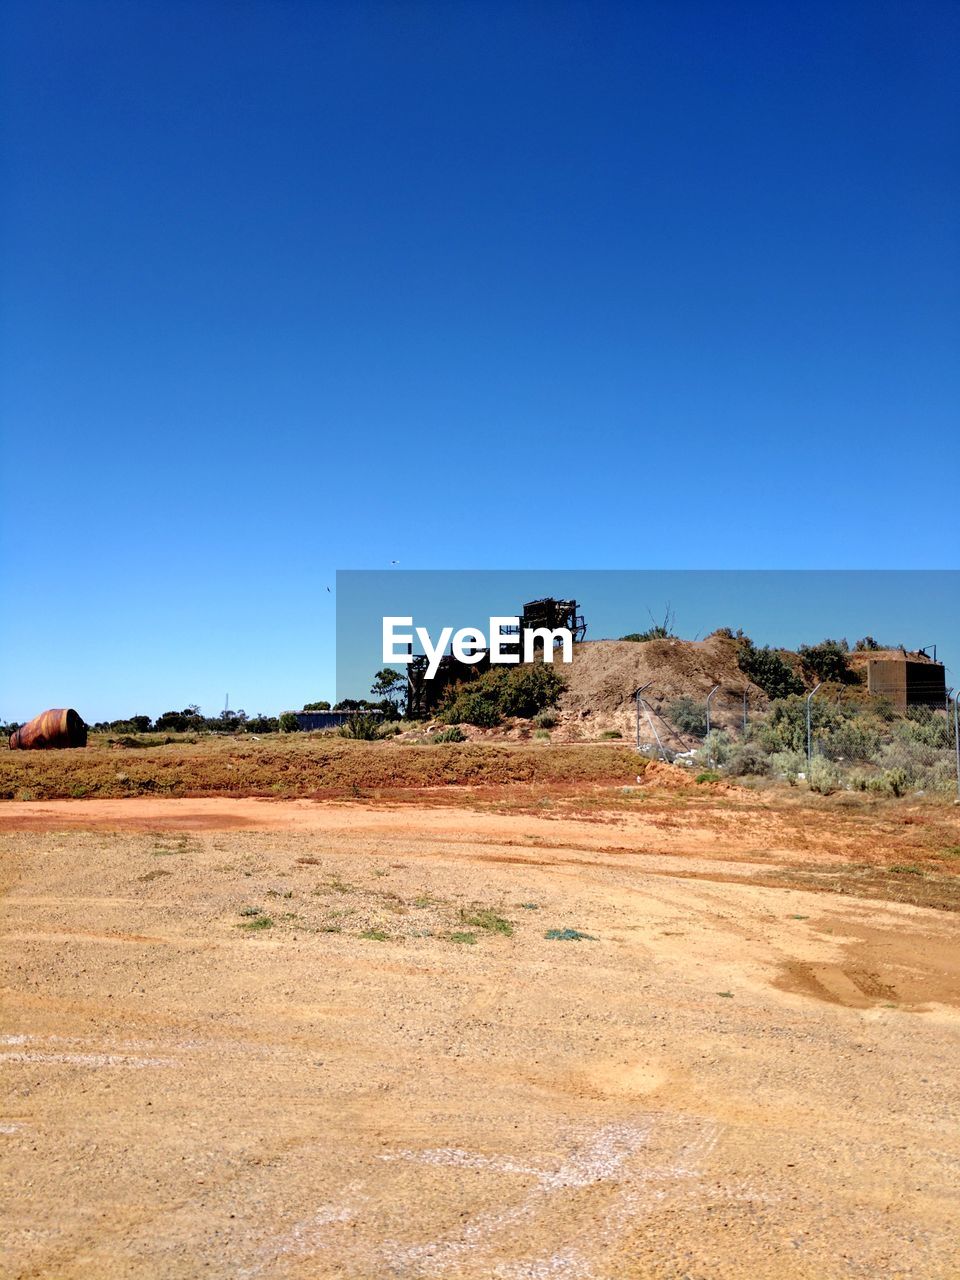 SCENIC VIEW OF SAND AGAINST CLEAR BLUE SKY AGAINST THE BACKGROUND